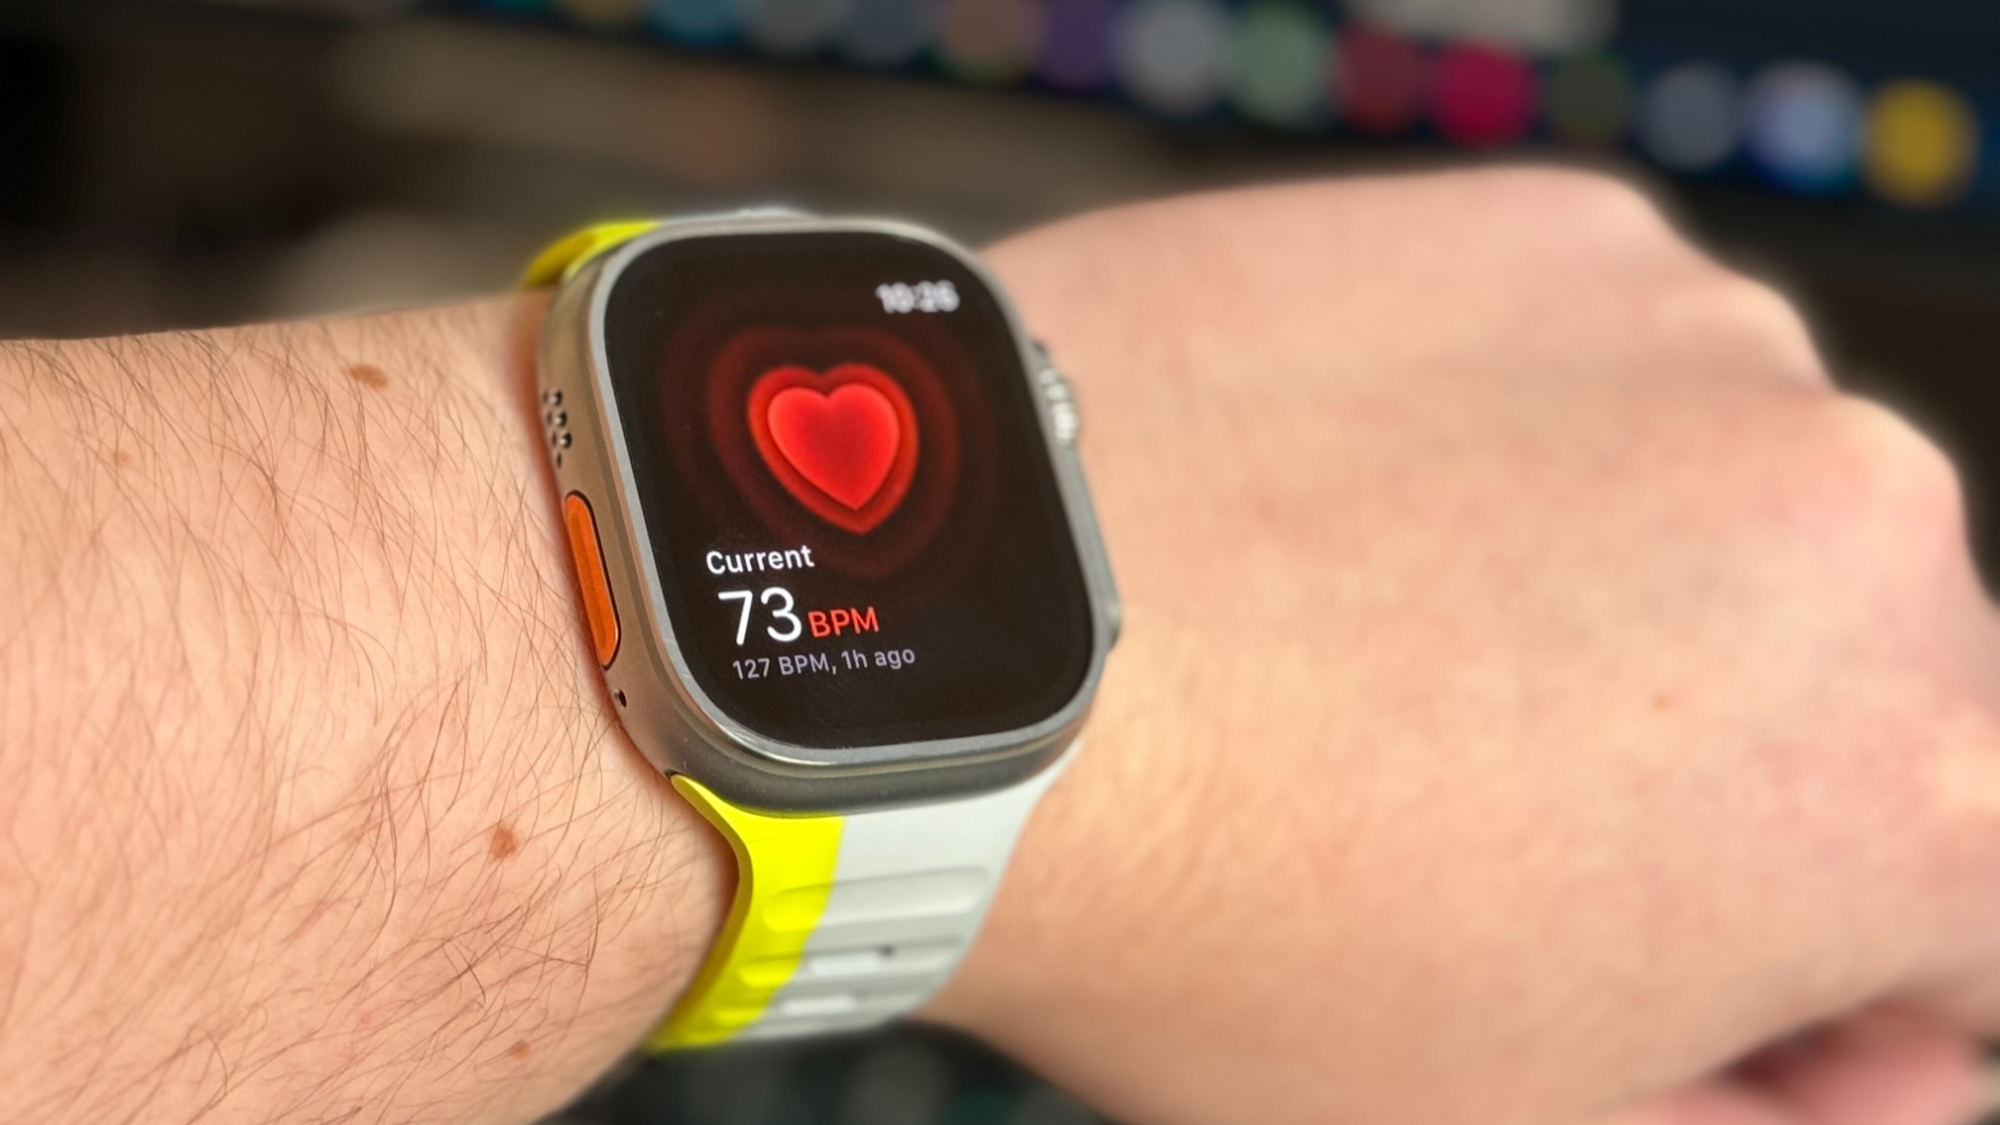 Apple Watch owner credits Apple Watch with helping him understand how mental health affects his body, emails Tim Cook to thank him